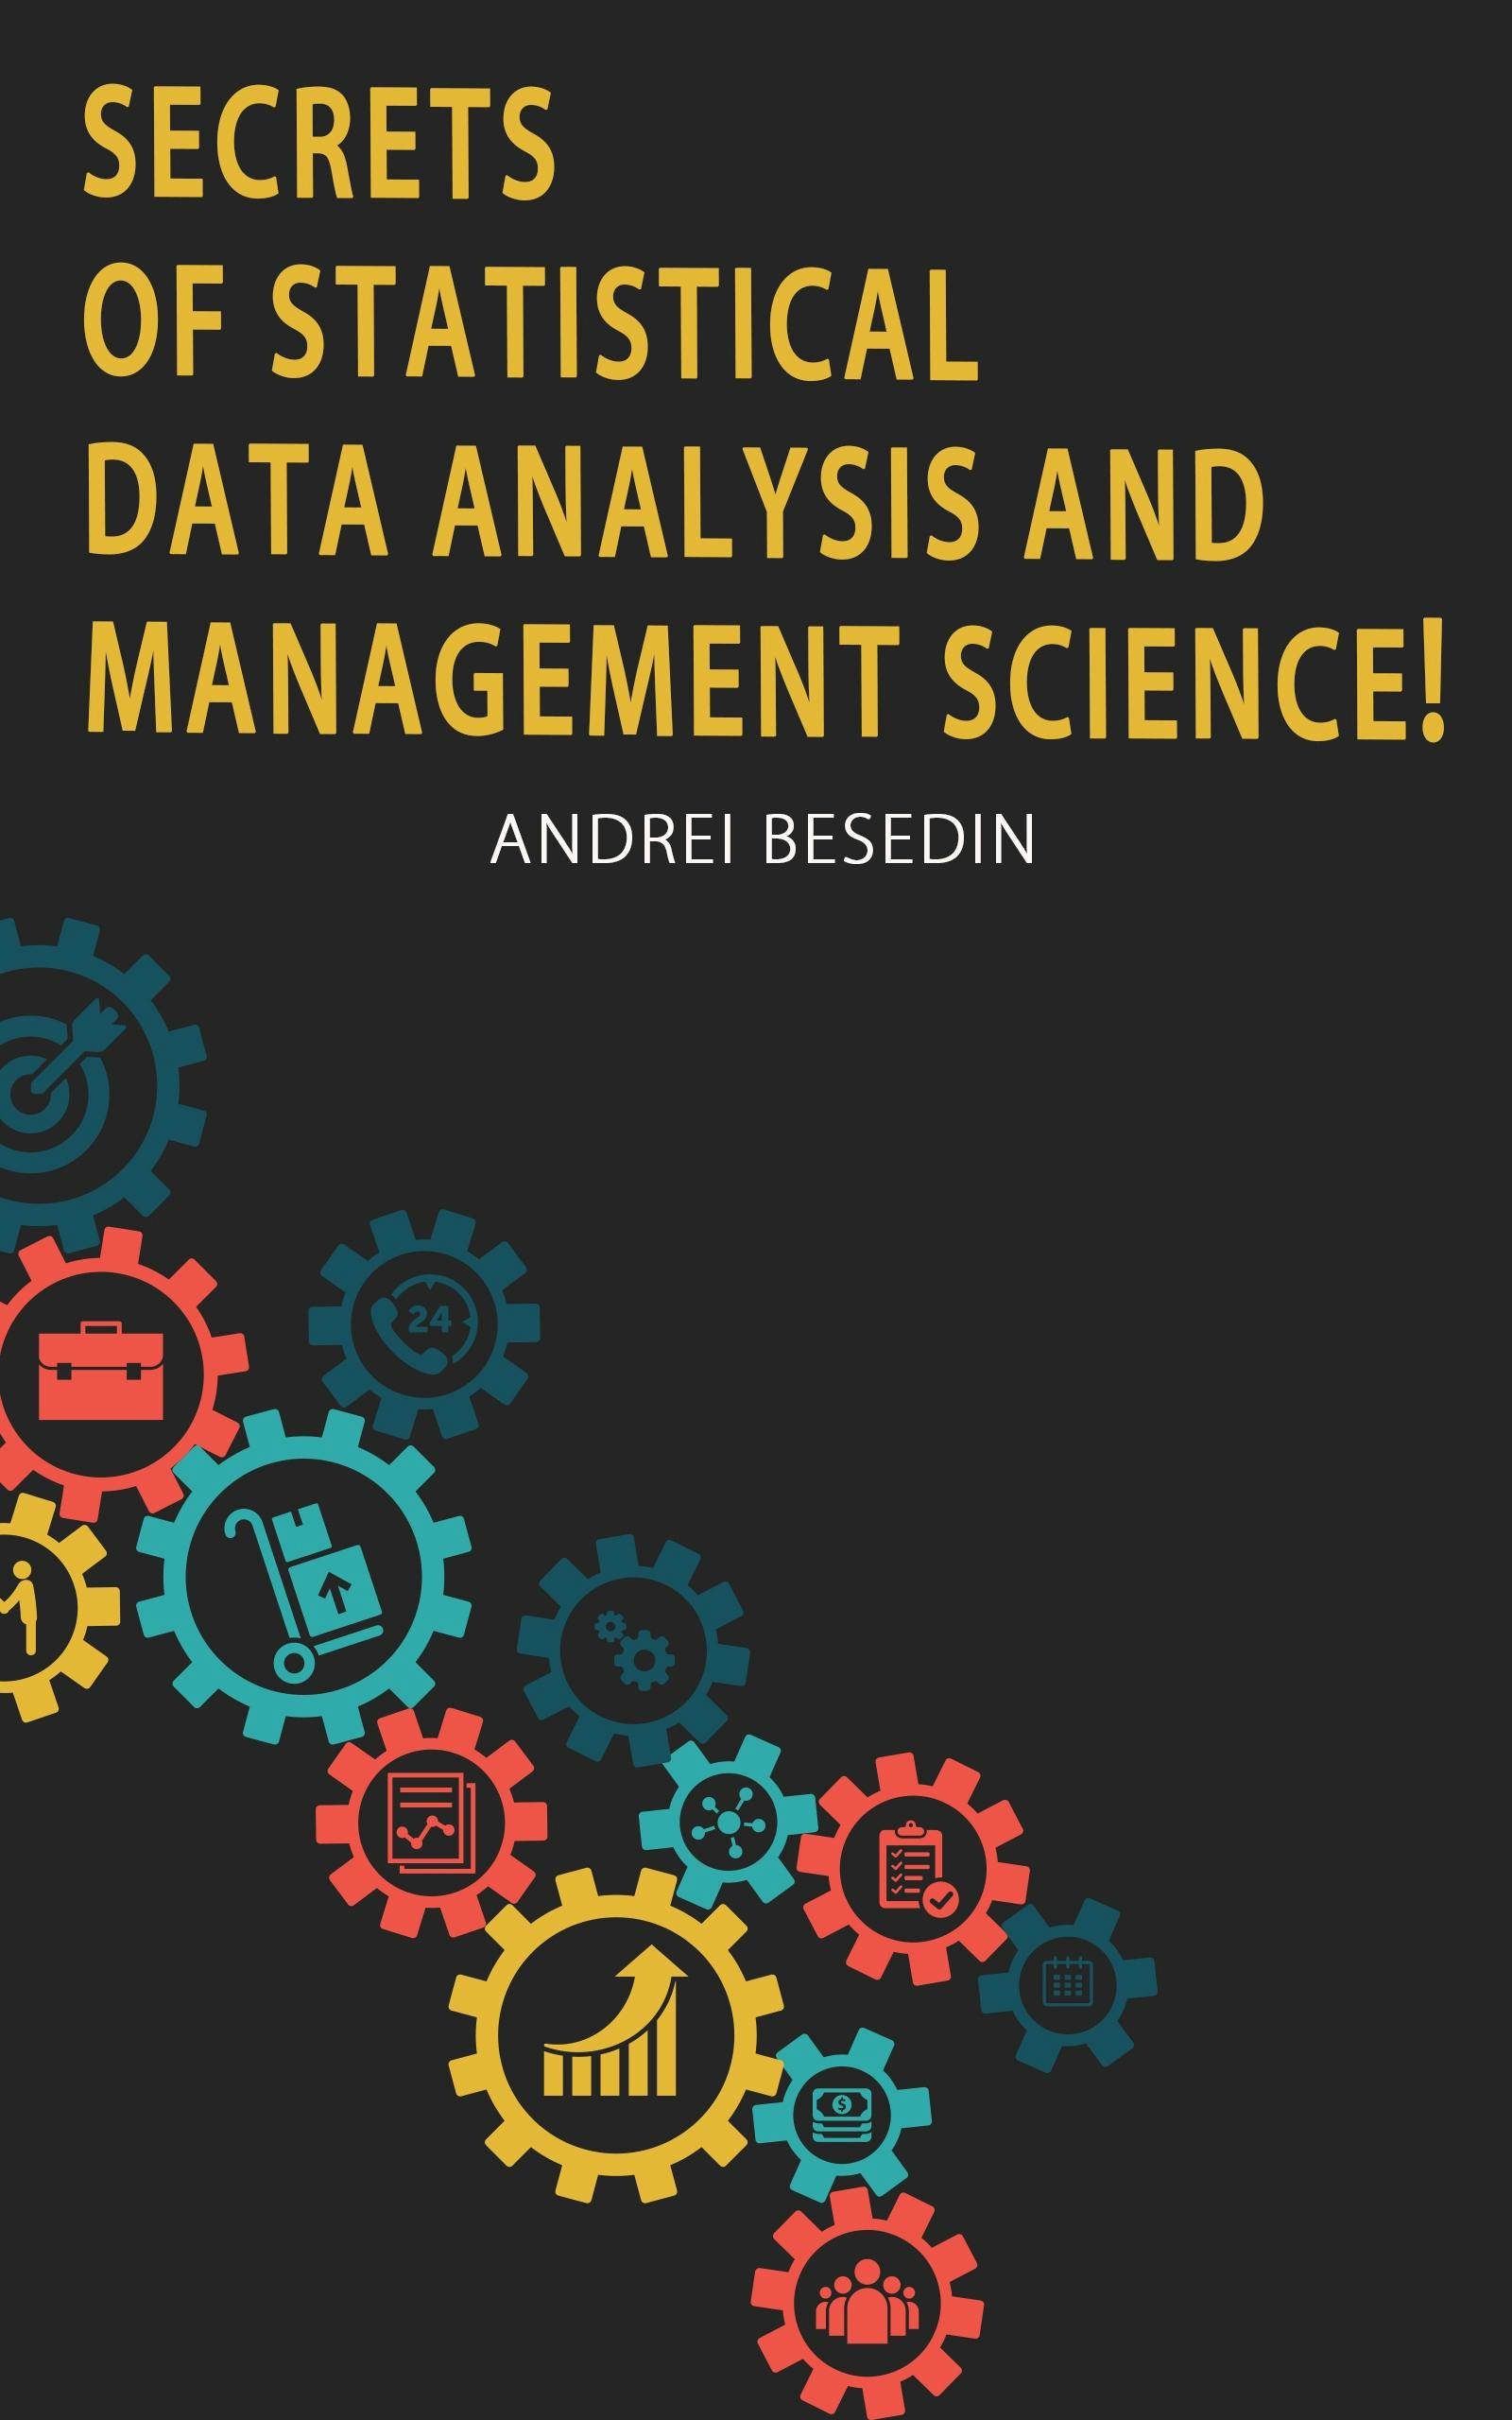 Secrets of Statistical Data Analysis and Management Science! - Andrei Besedin